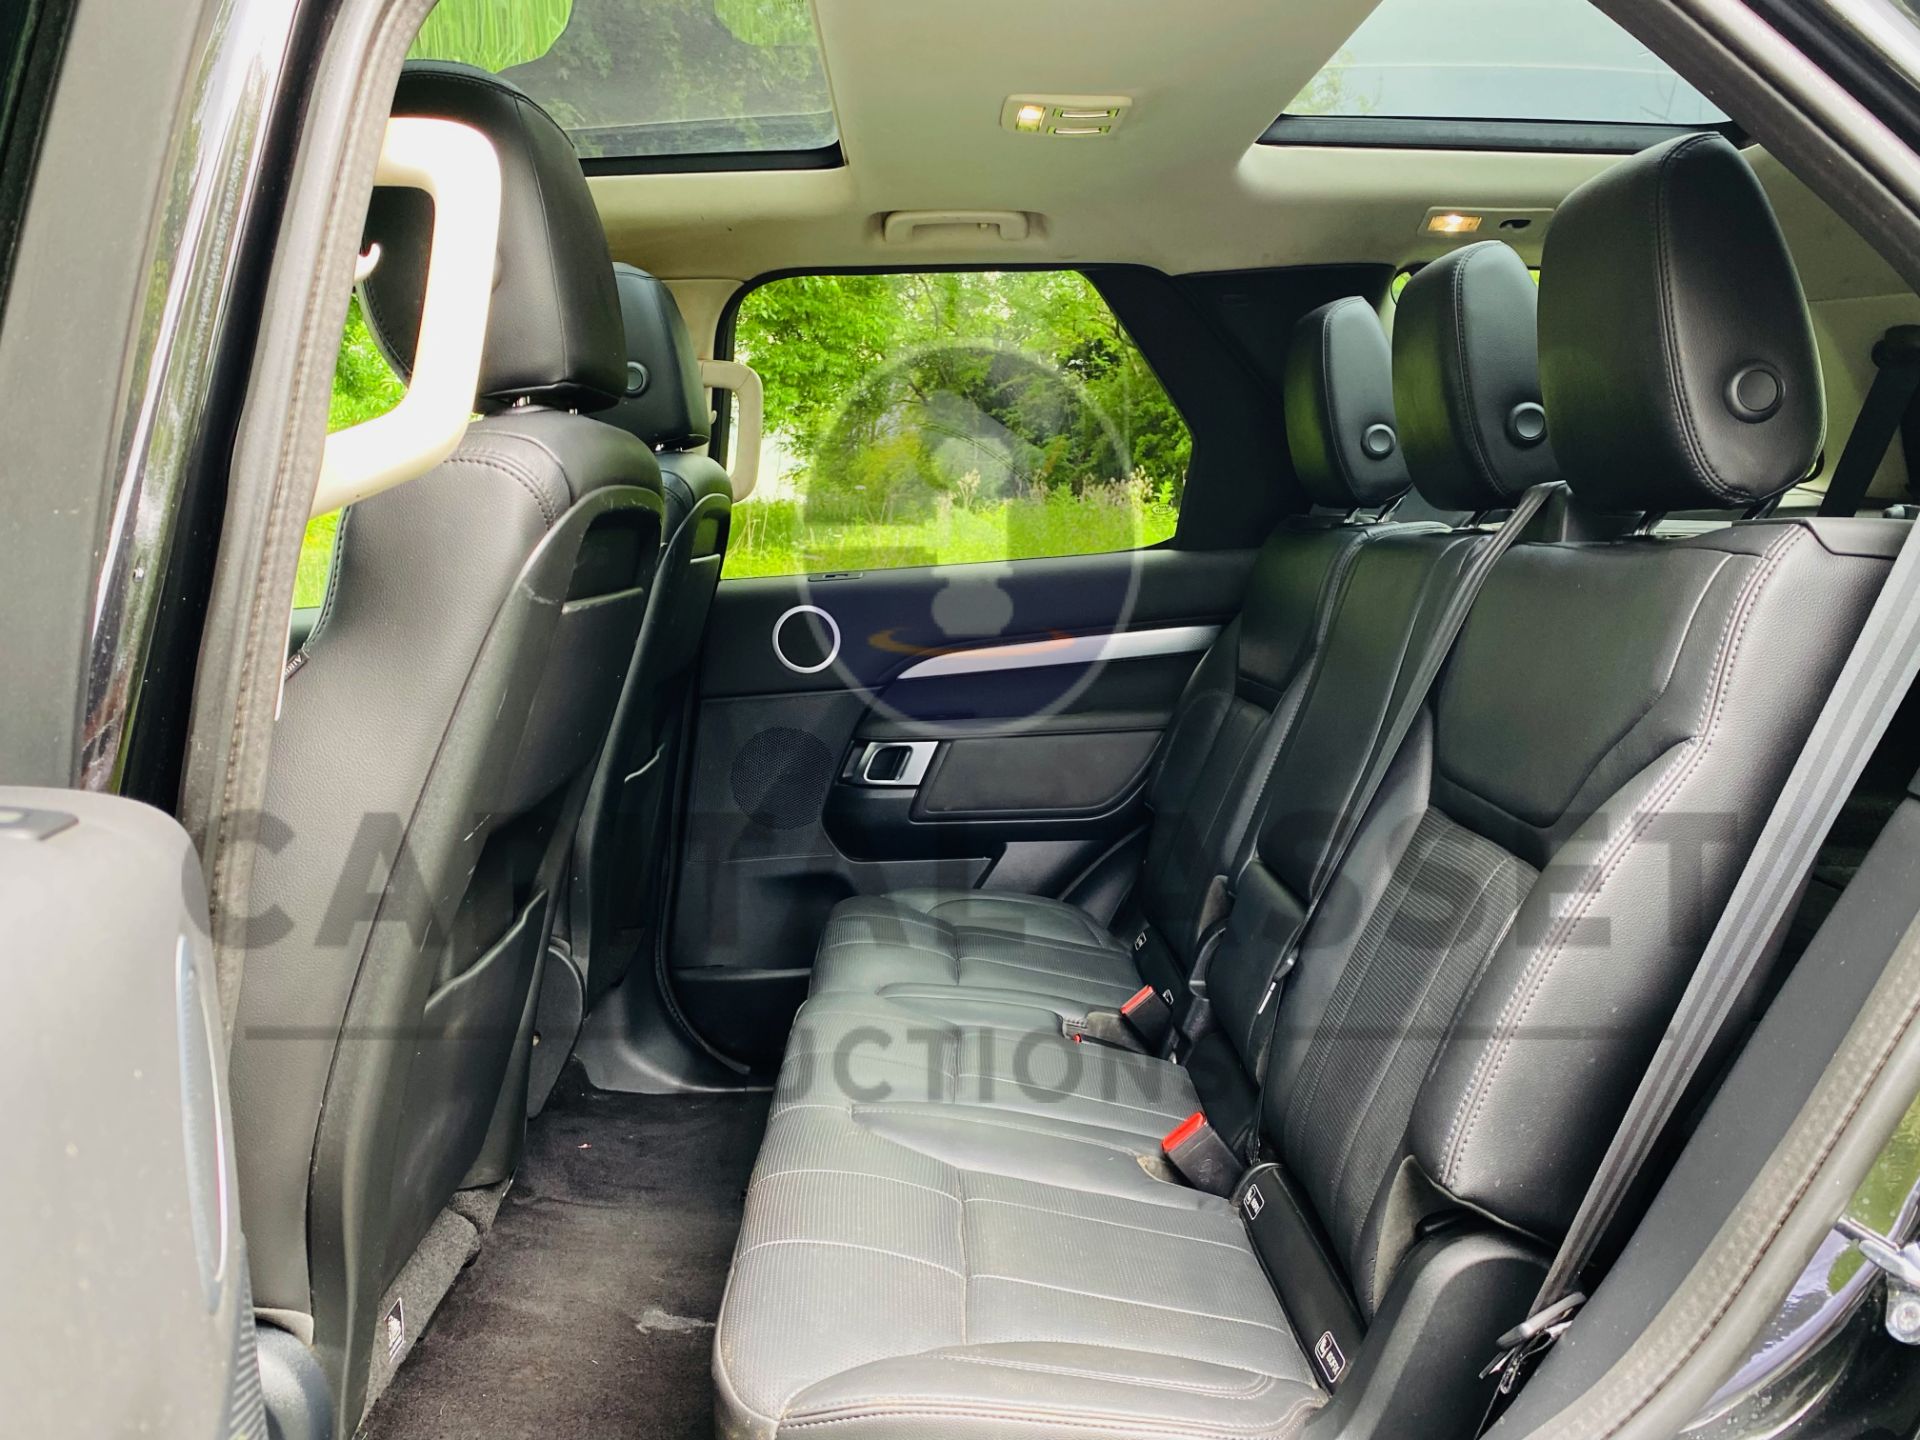 LAND ROVER DISCOVERY 5 *LANDMARK* 7 SEATER SUV (2020 - EURO 6) 3.0 SD6 - 8 SPEED AUTO *FULLY LOADED* - Image 28 of 63